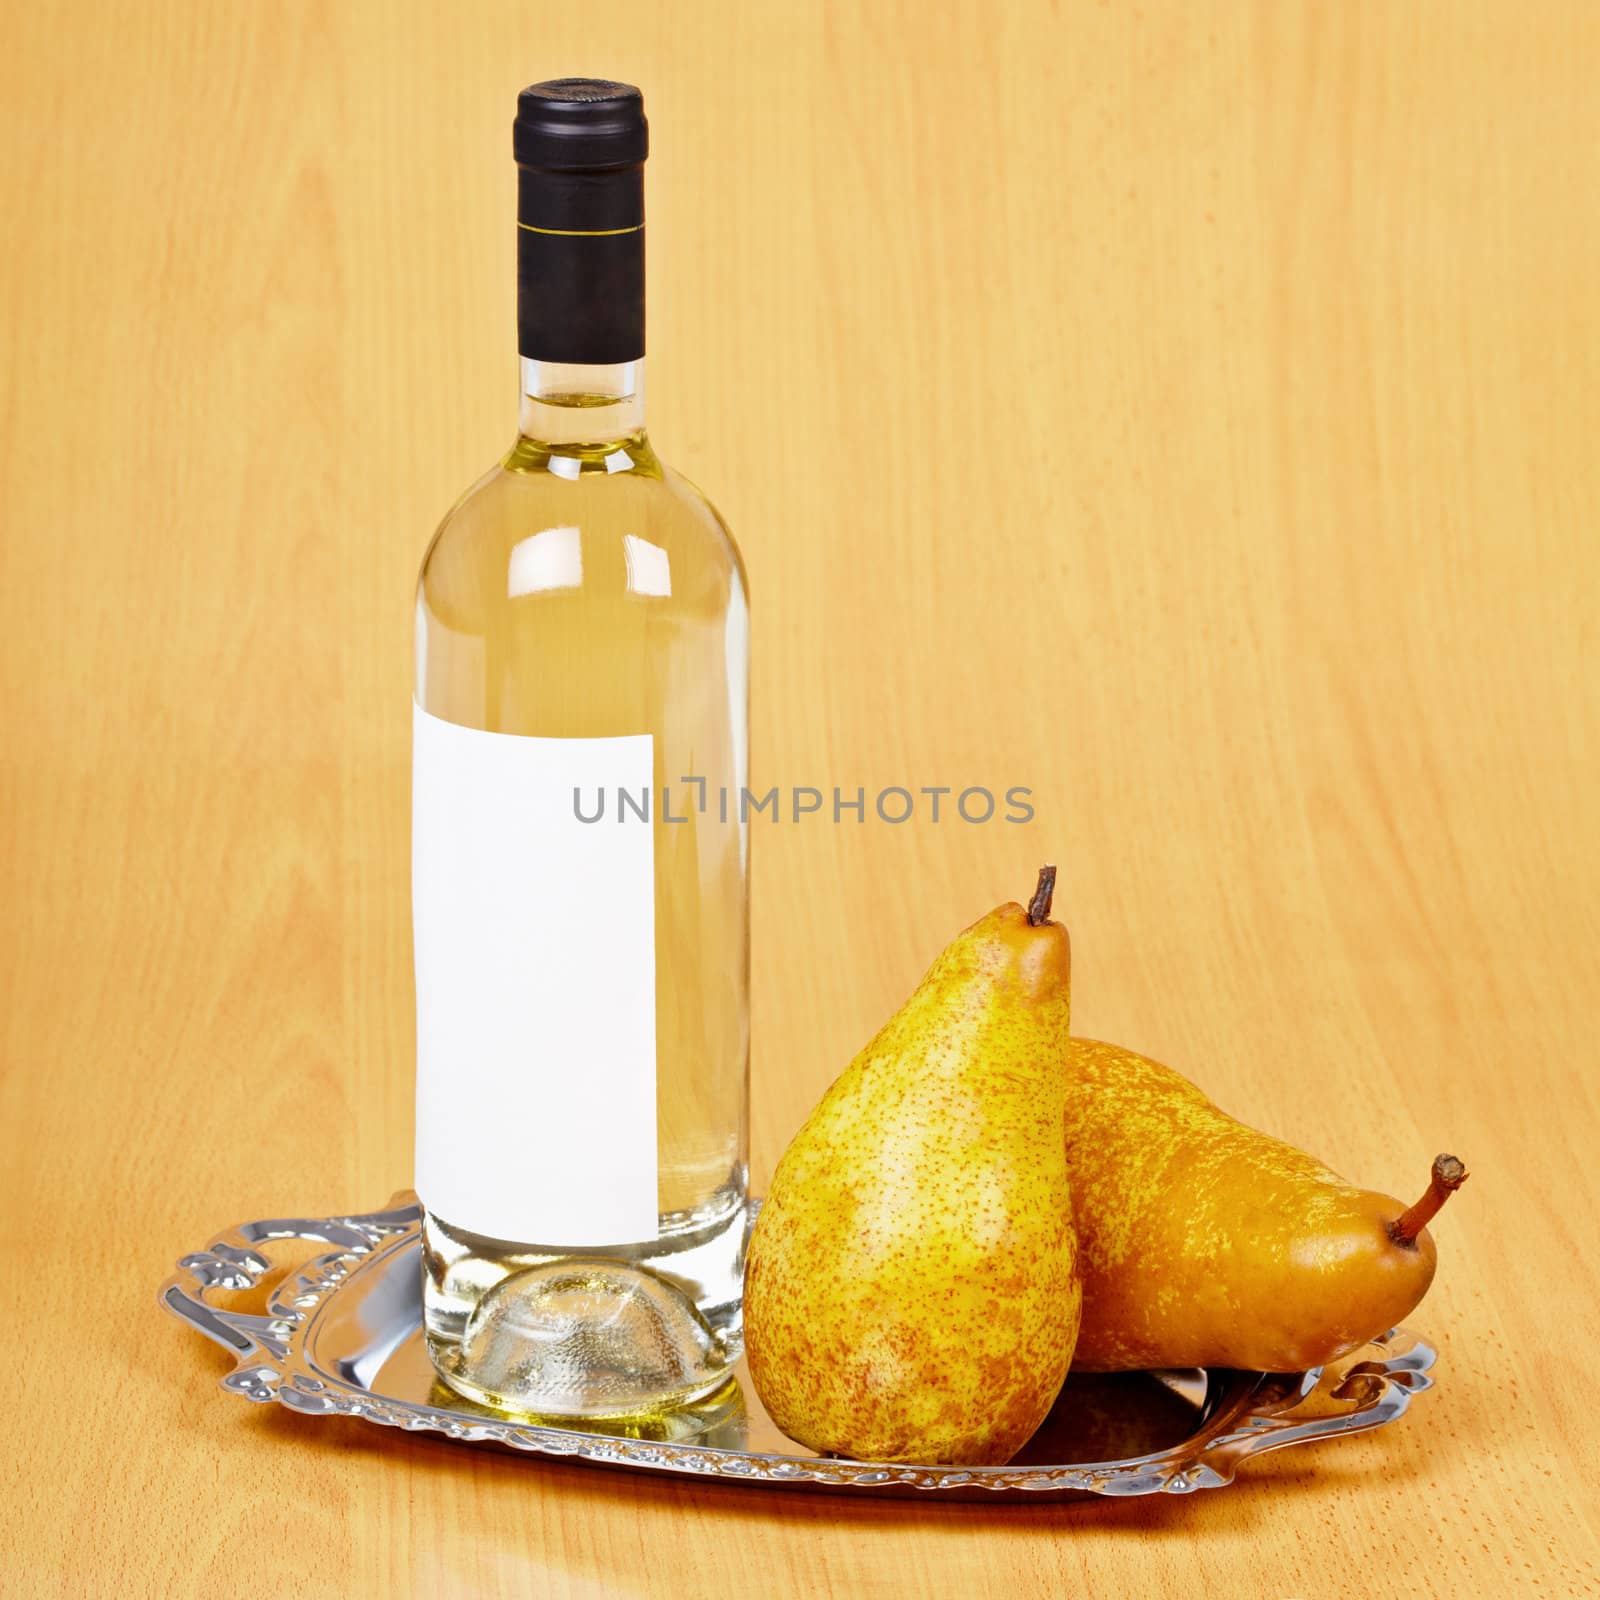 Still life from a bottle of pear wine on the table